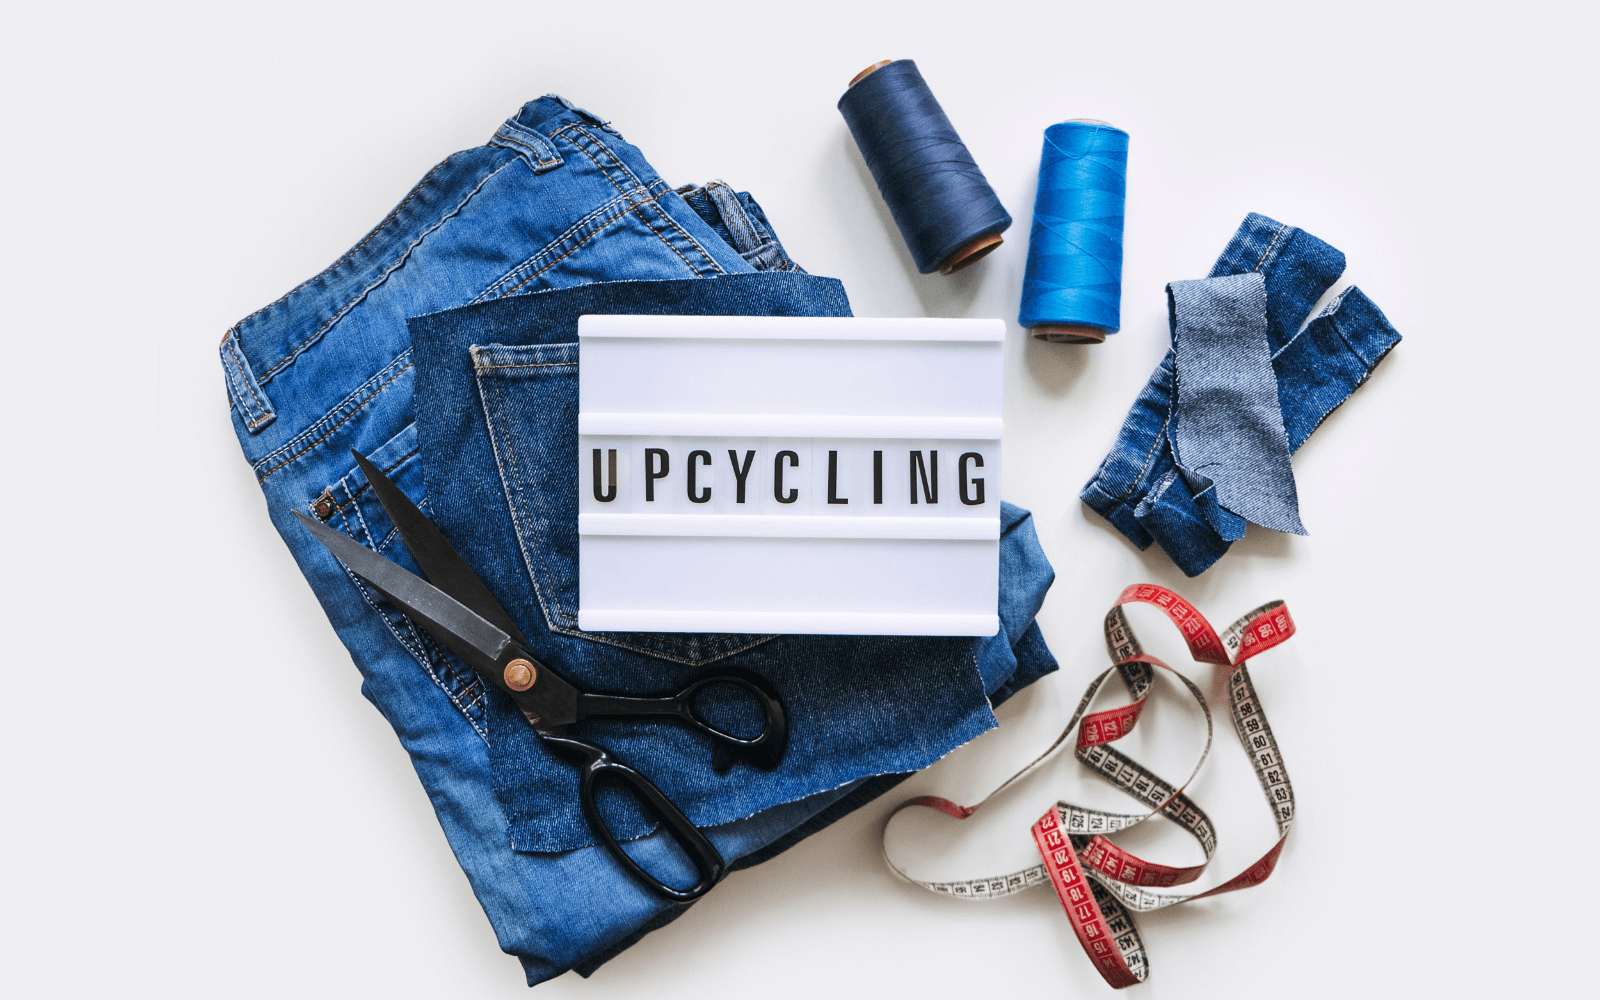 Sustainable fashion. Repurpose, recycle or donate. A photo of some jeans with sewing equipment and a sign that says Upcycling.